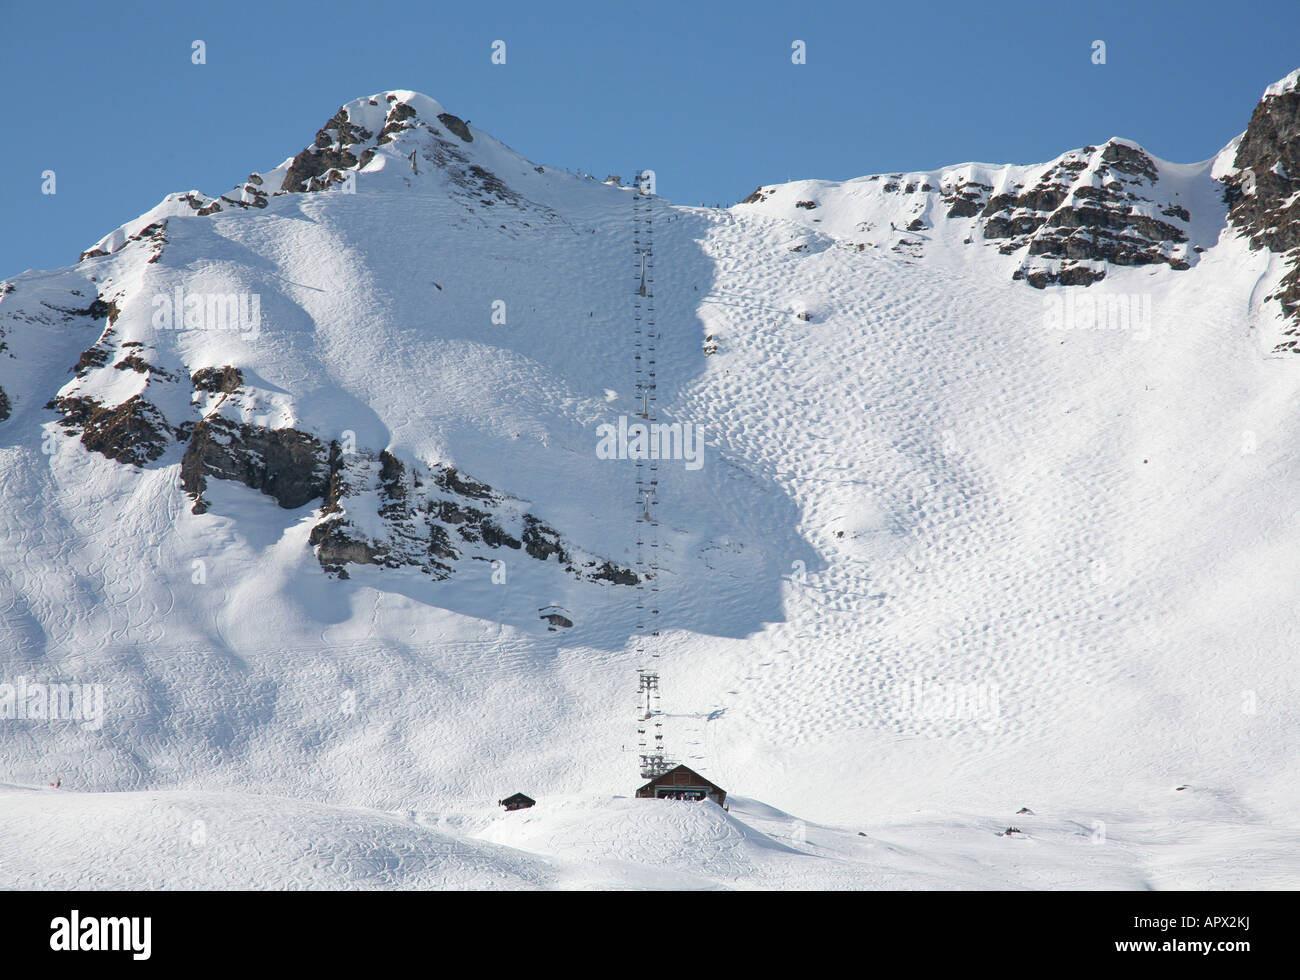 The ski slopes of Champery Switzerland with the steep bumpy run called the Swiss Wall Stock Photo